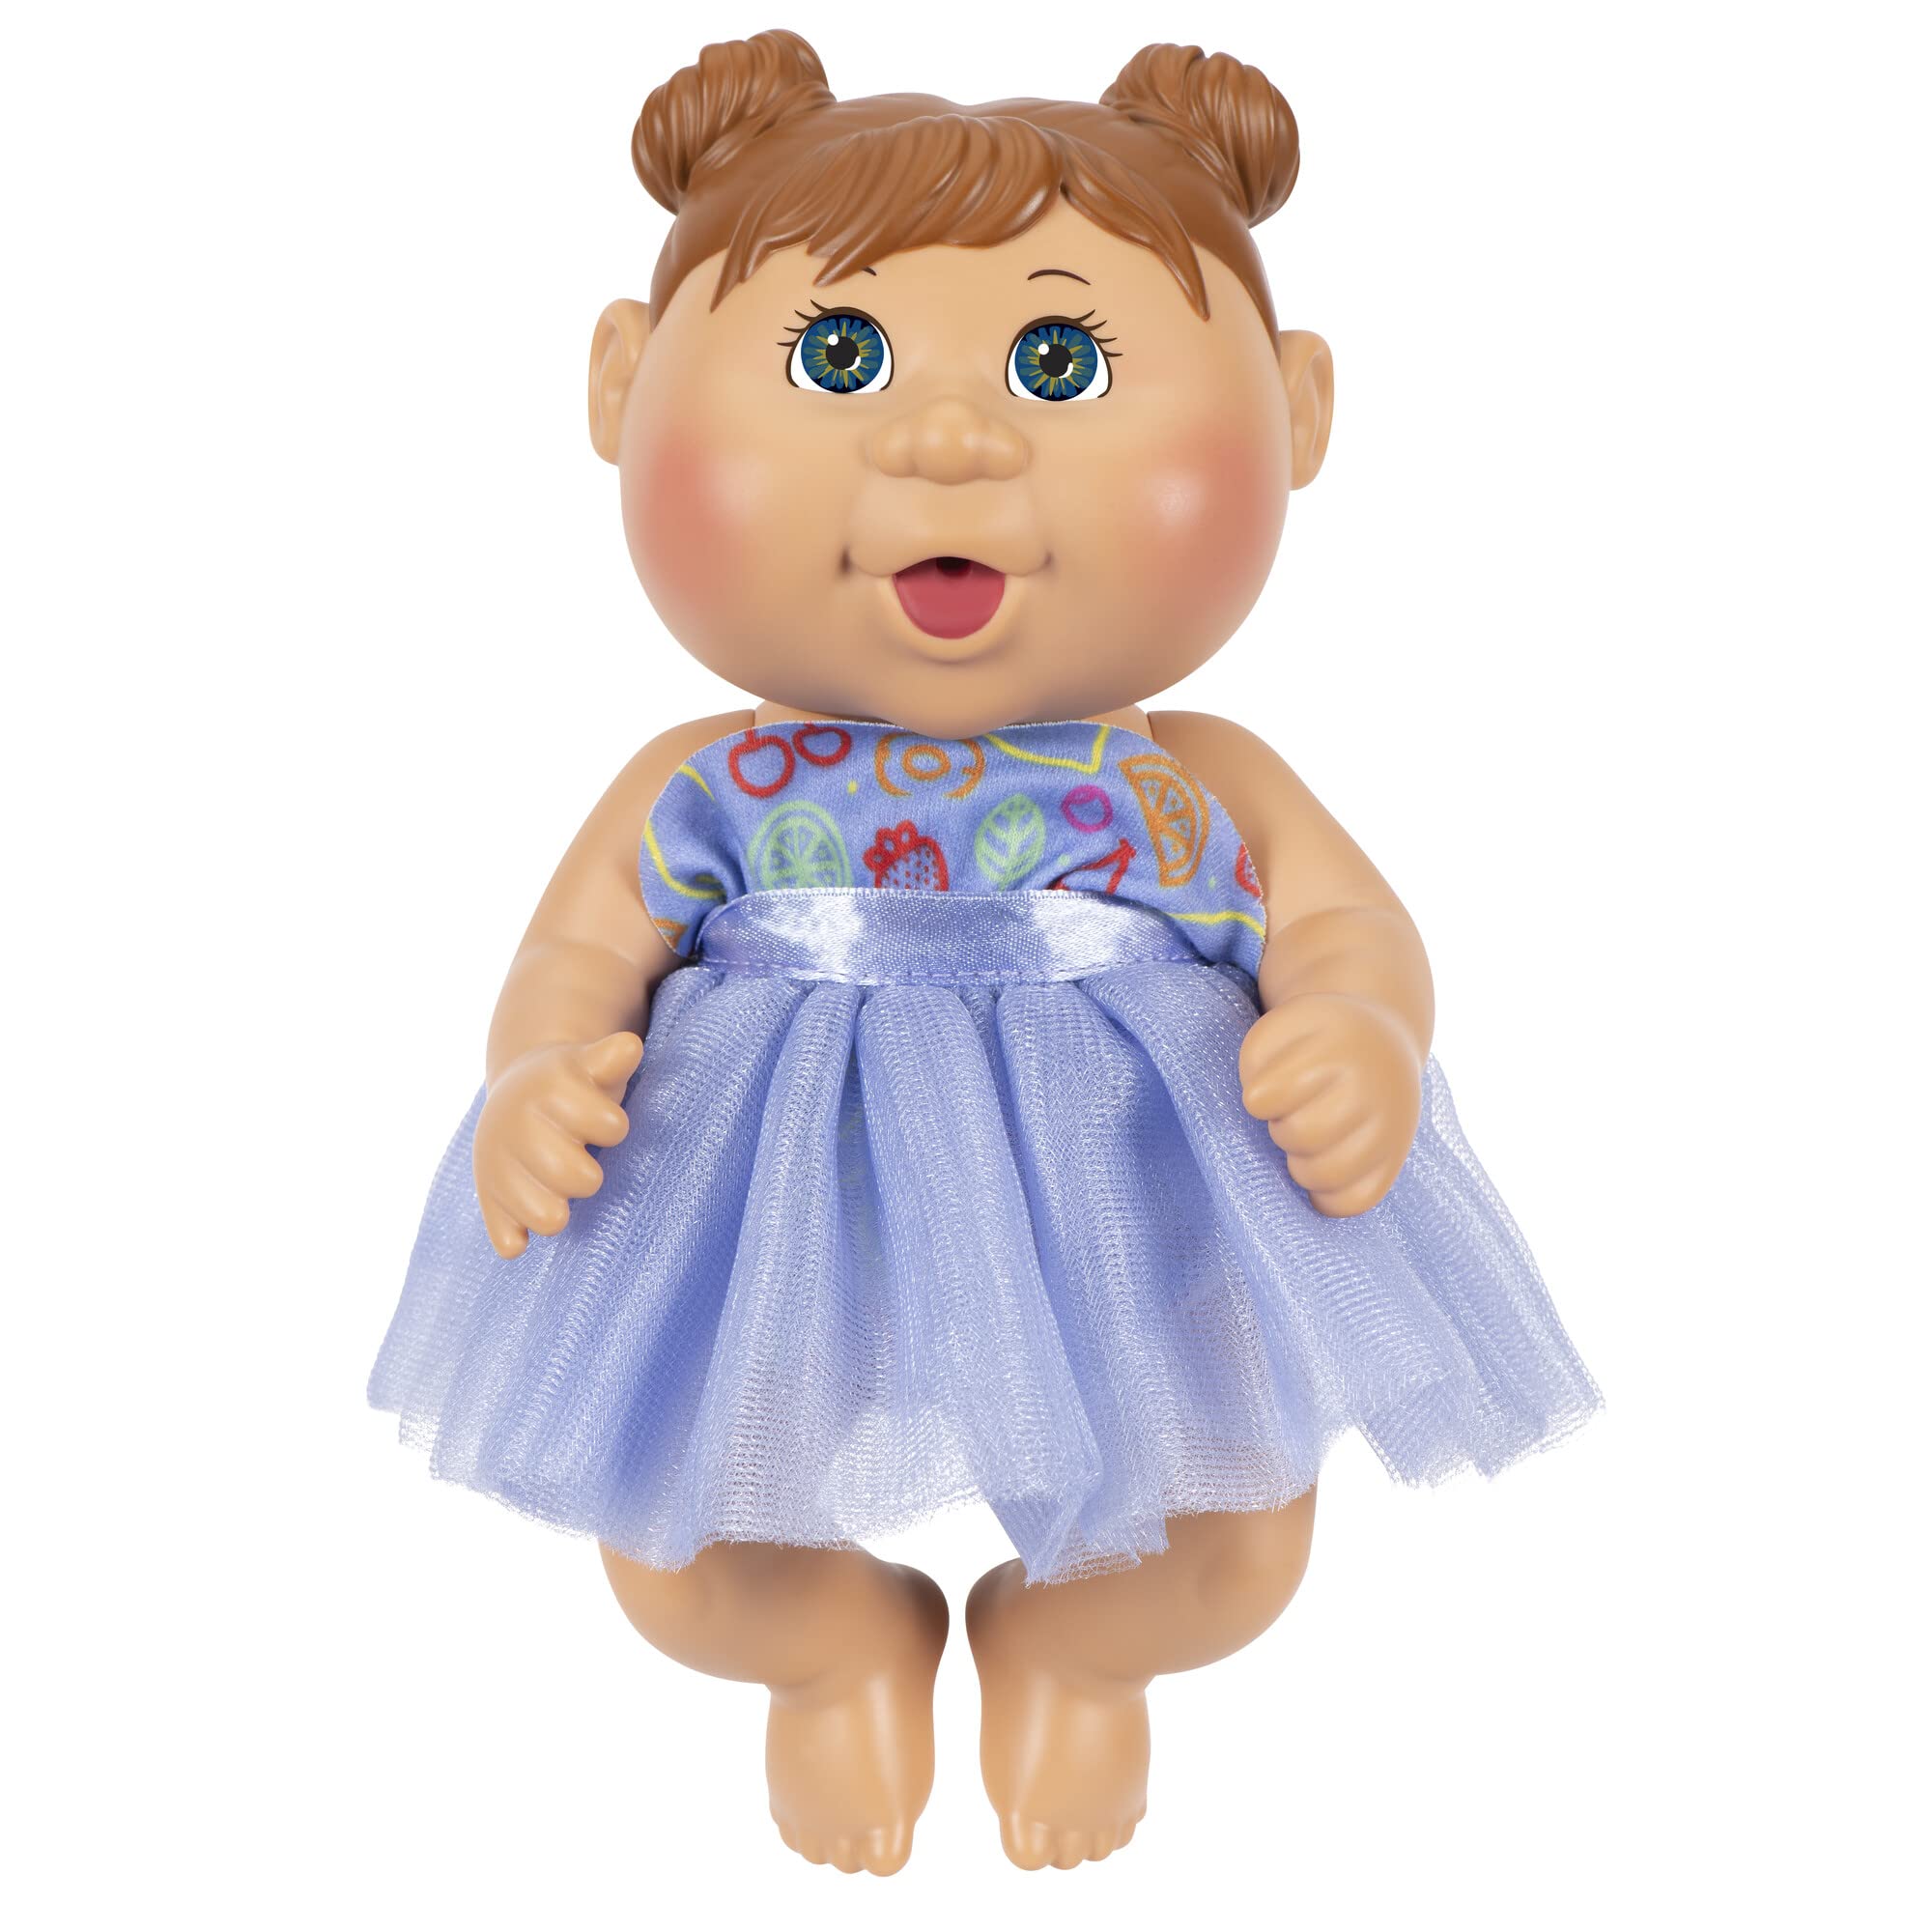 Cabbage Patch Kids Deluxe Tiny Newborn - 9 Inch CPK Doll - Sweet Treats (Brunette, Hazel Eyes) - Drink & Wet - Includes Pink Popsicle, Pineapple Bottle, Removable Diaper - Grow Your Cabbage Patch